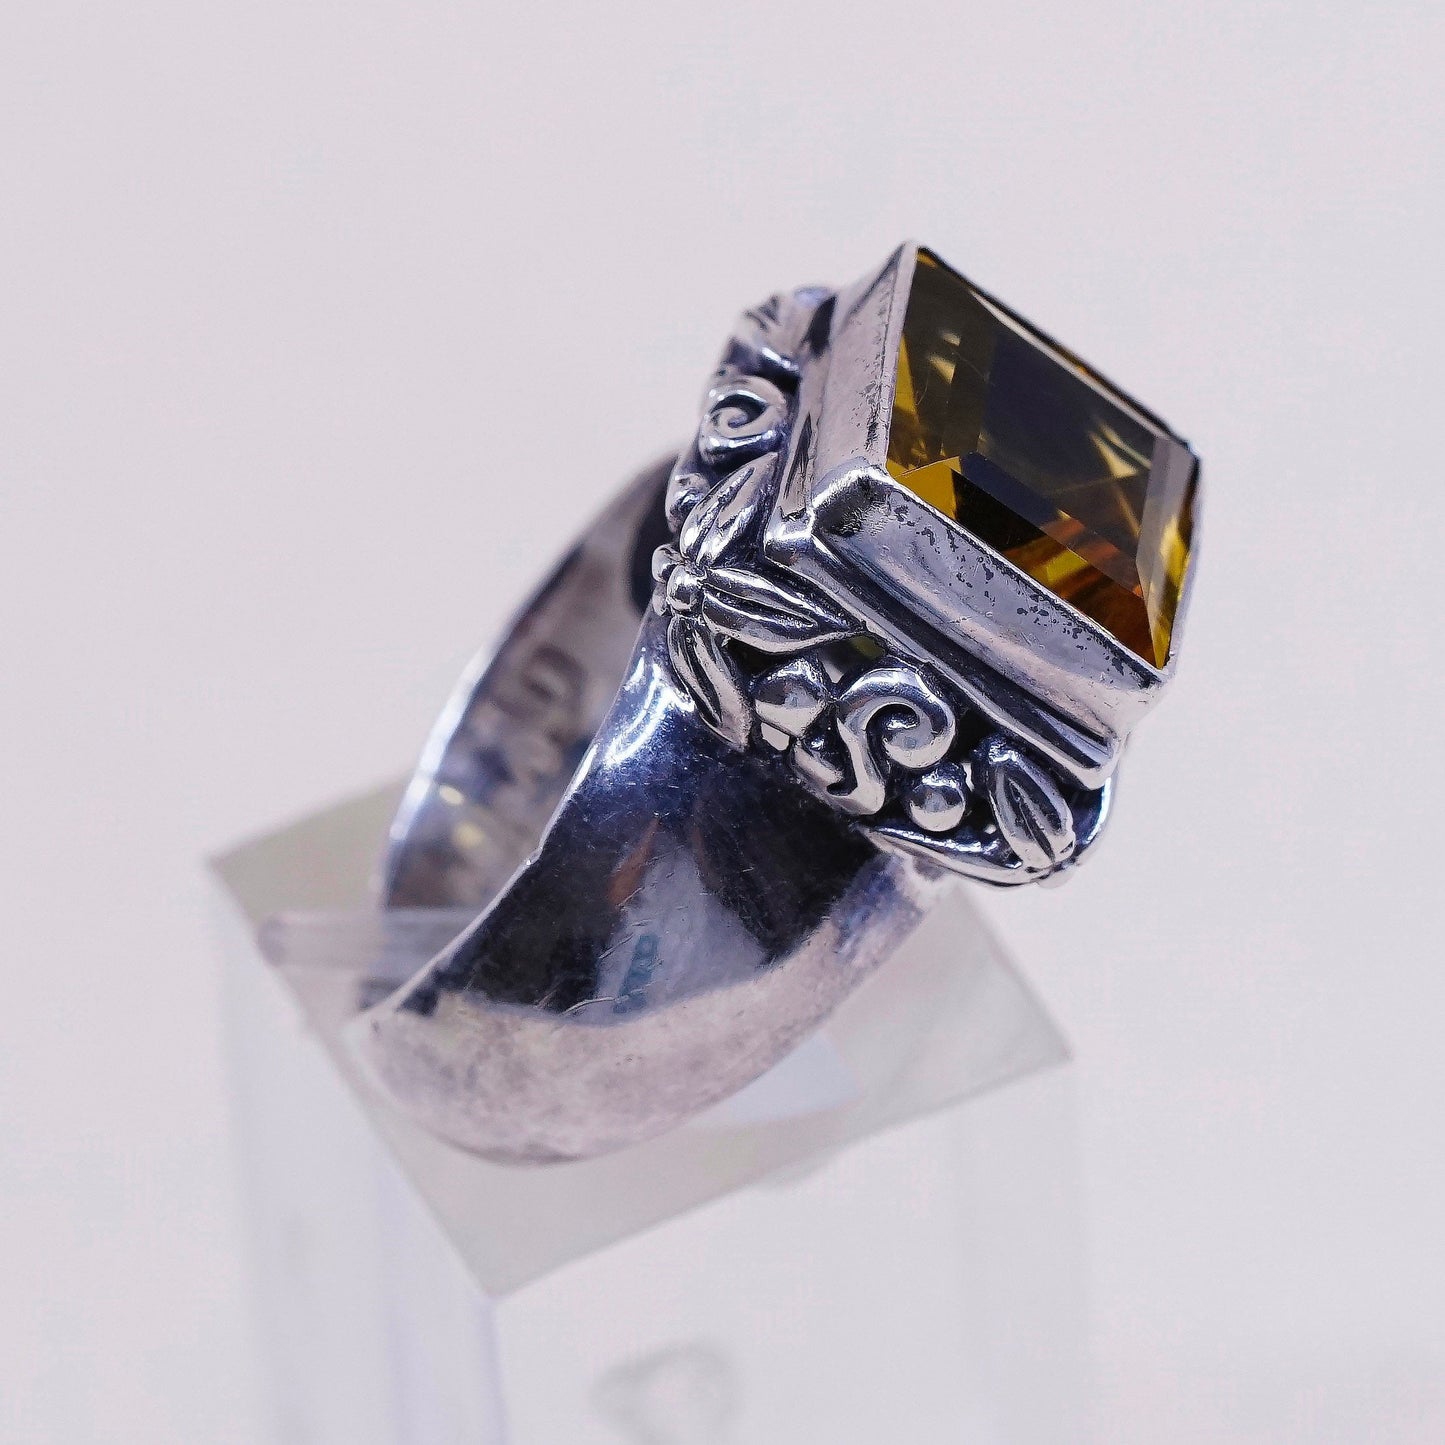 Size 6, VTG Sterling 925 silver handmade statement ring with square citrine